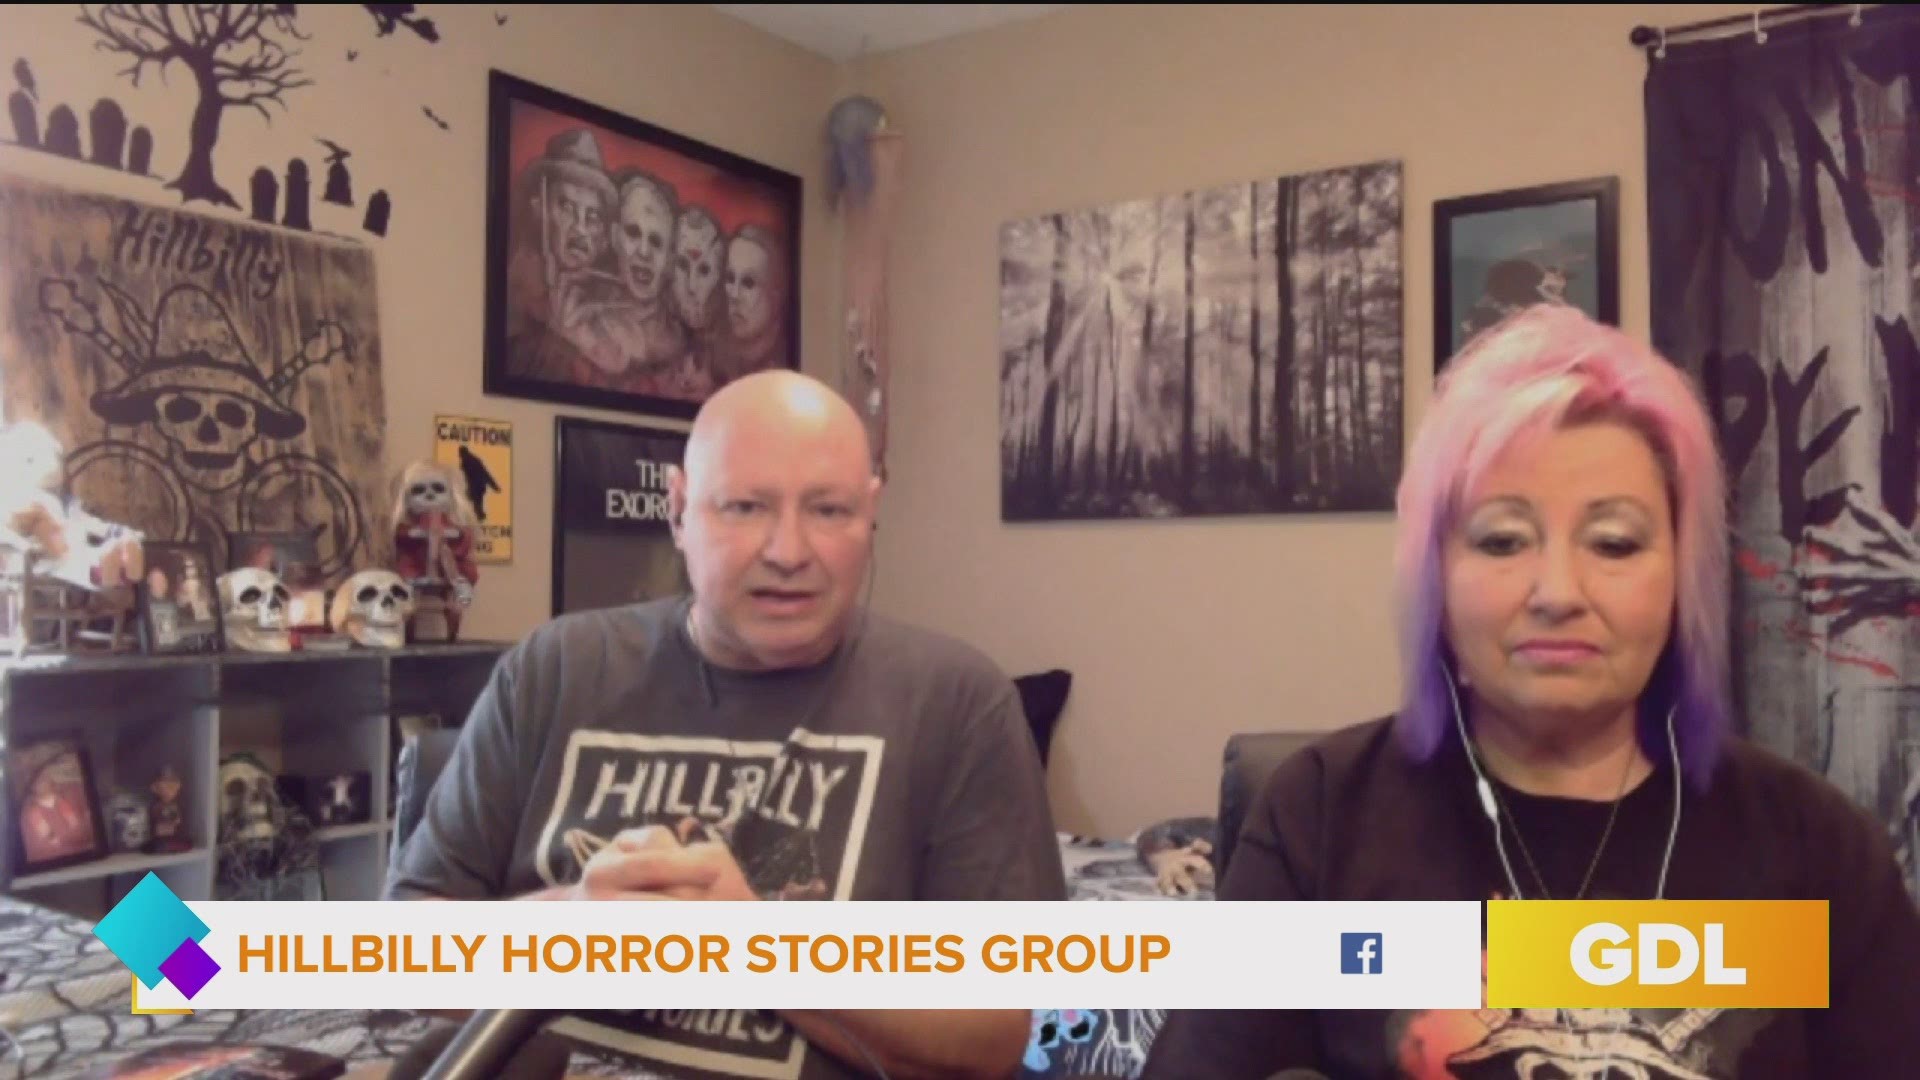 To learn more about Hillbilly Horror Stories podcast, visit hillbillyhorrorstories.com.